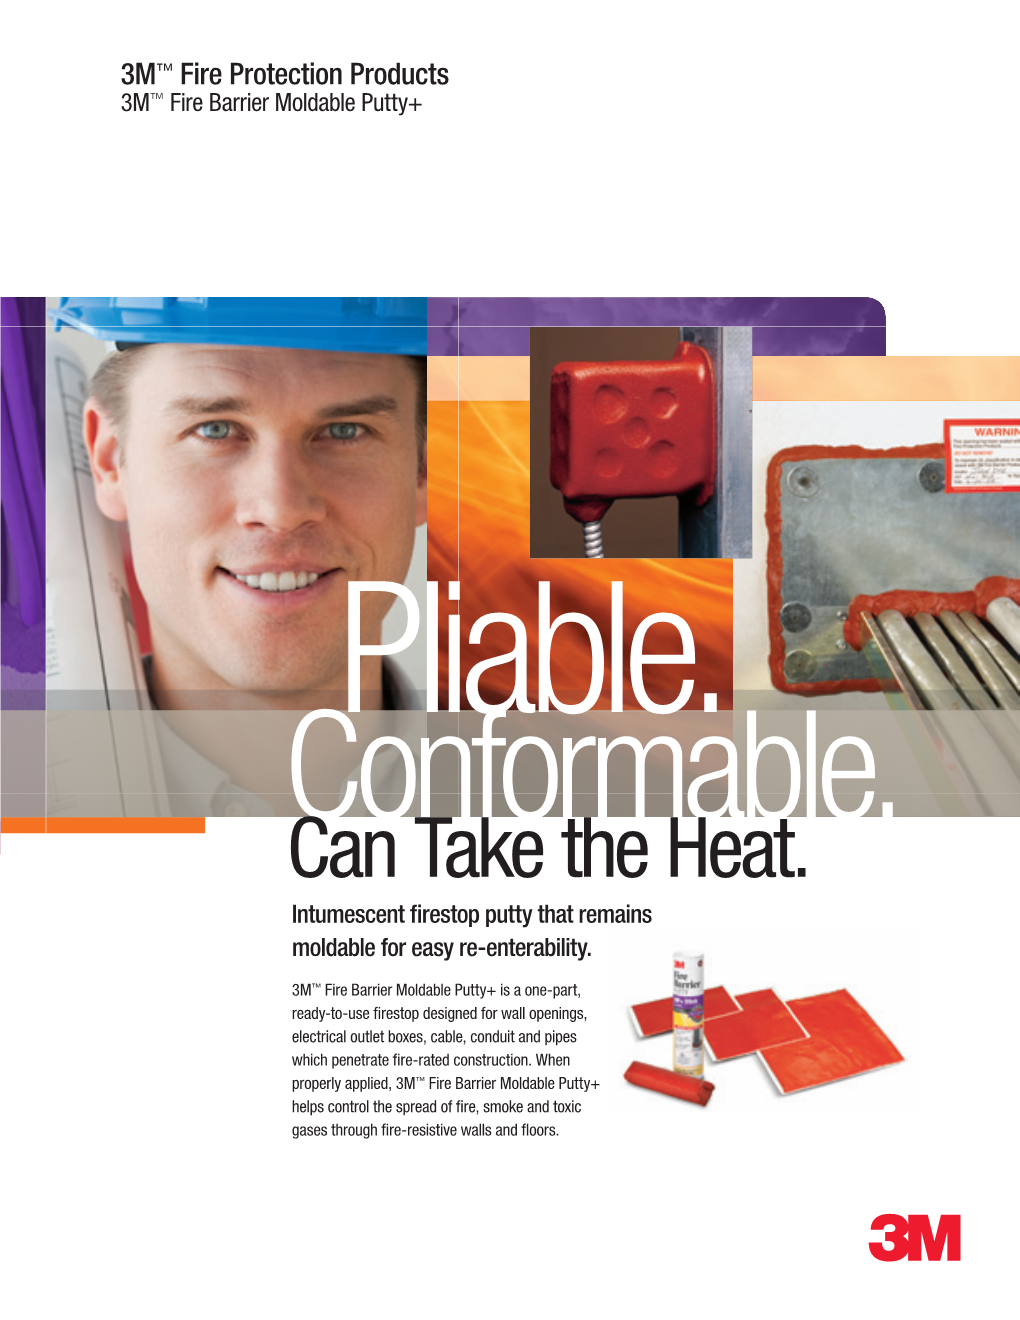 3M™ Fire Protection Products 3M™ Fire Barrier Moldable Putty+